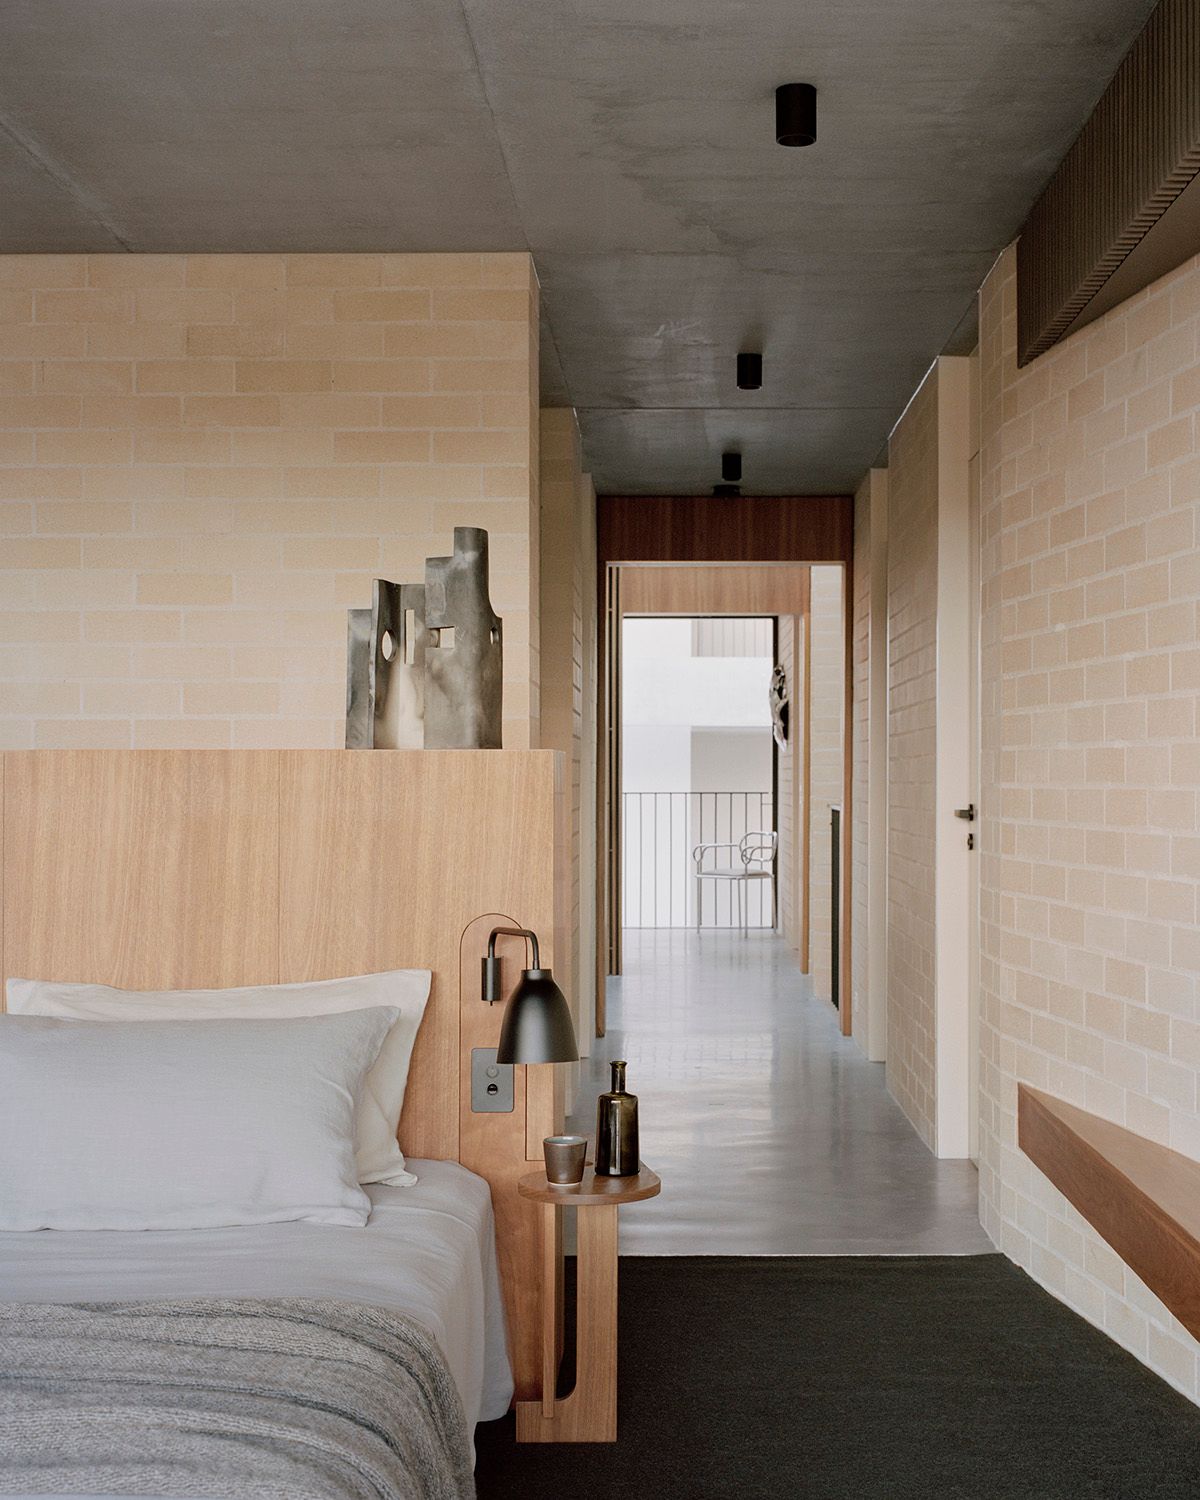 Bronte House by Tribe Studio Architects showing interior bedroom view of timber veneer bed head